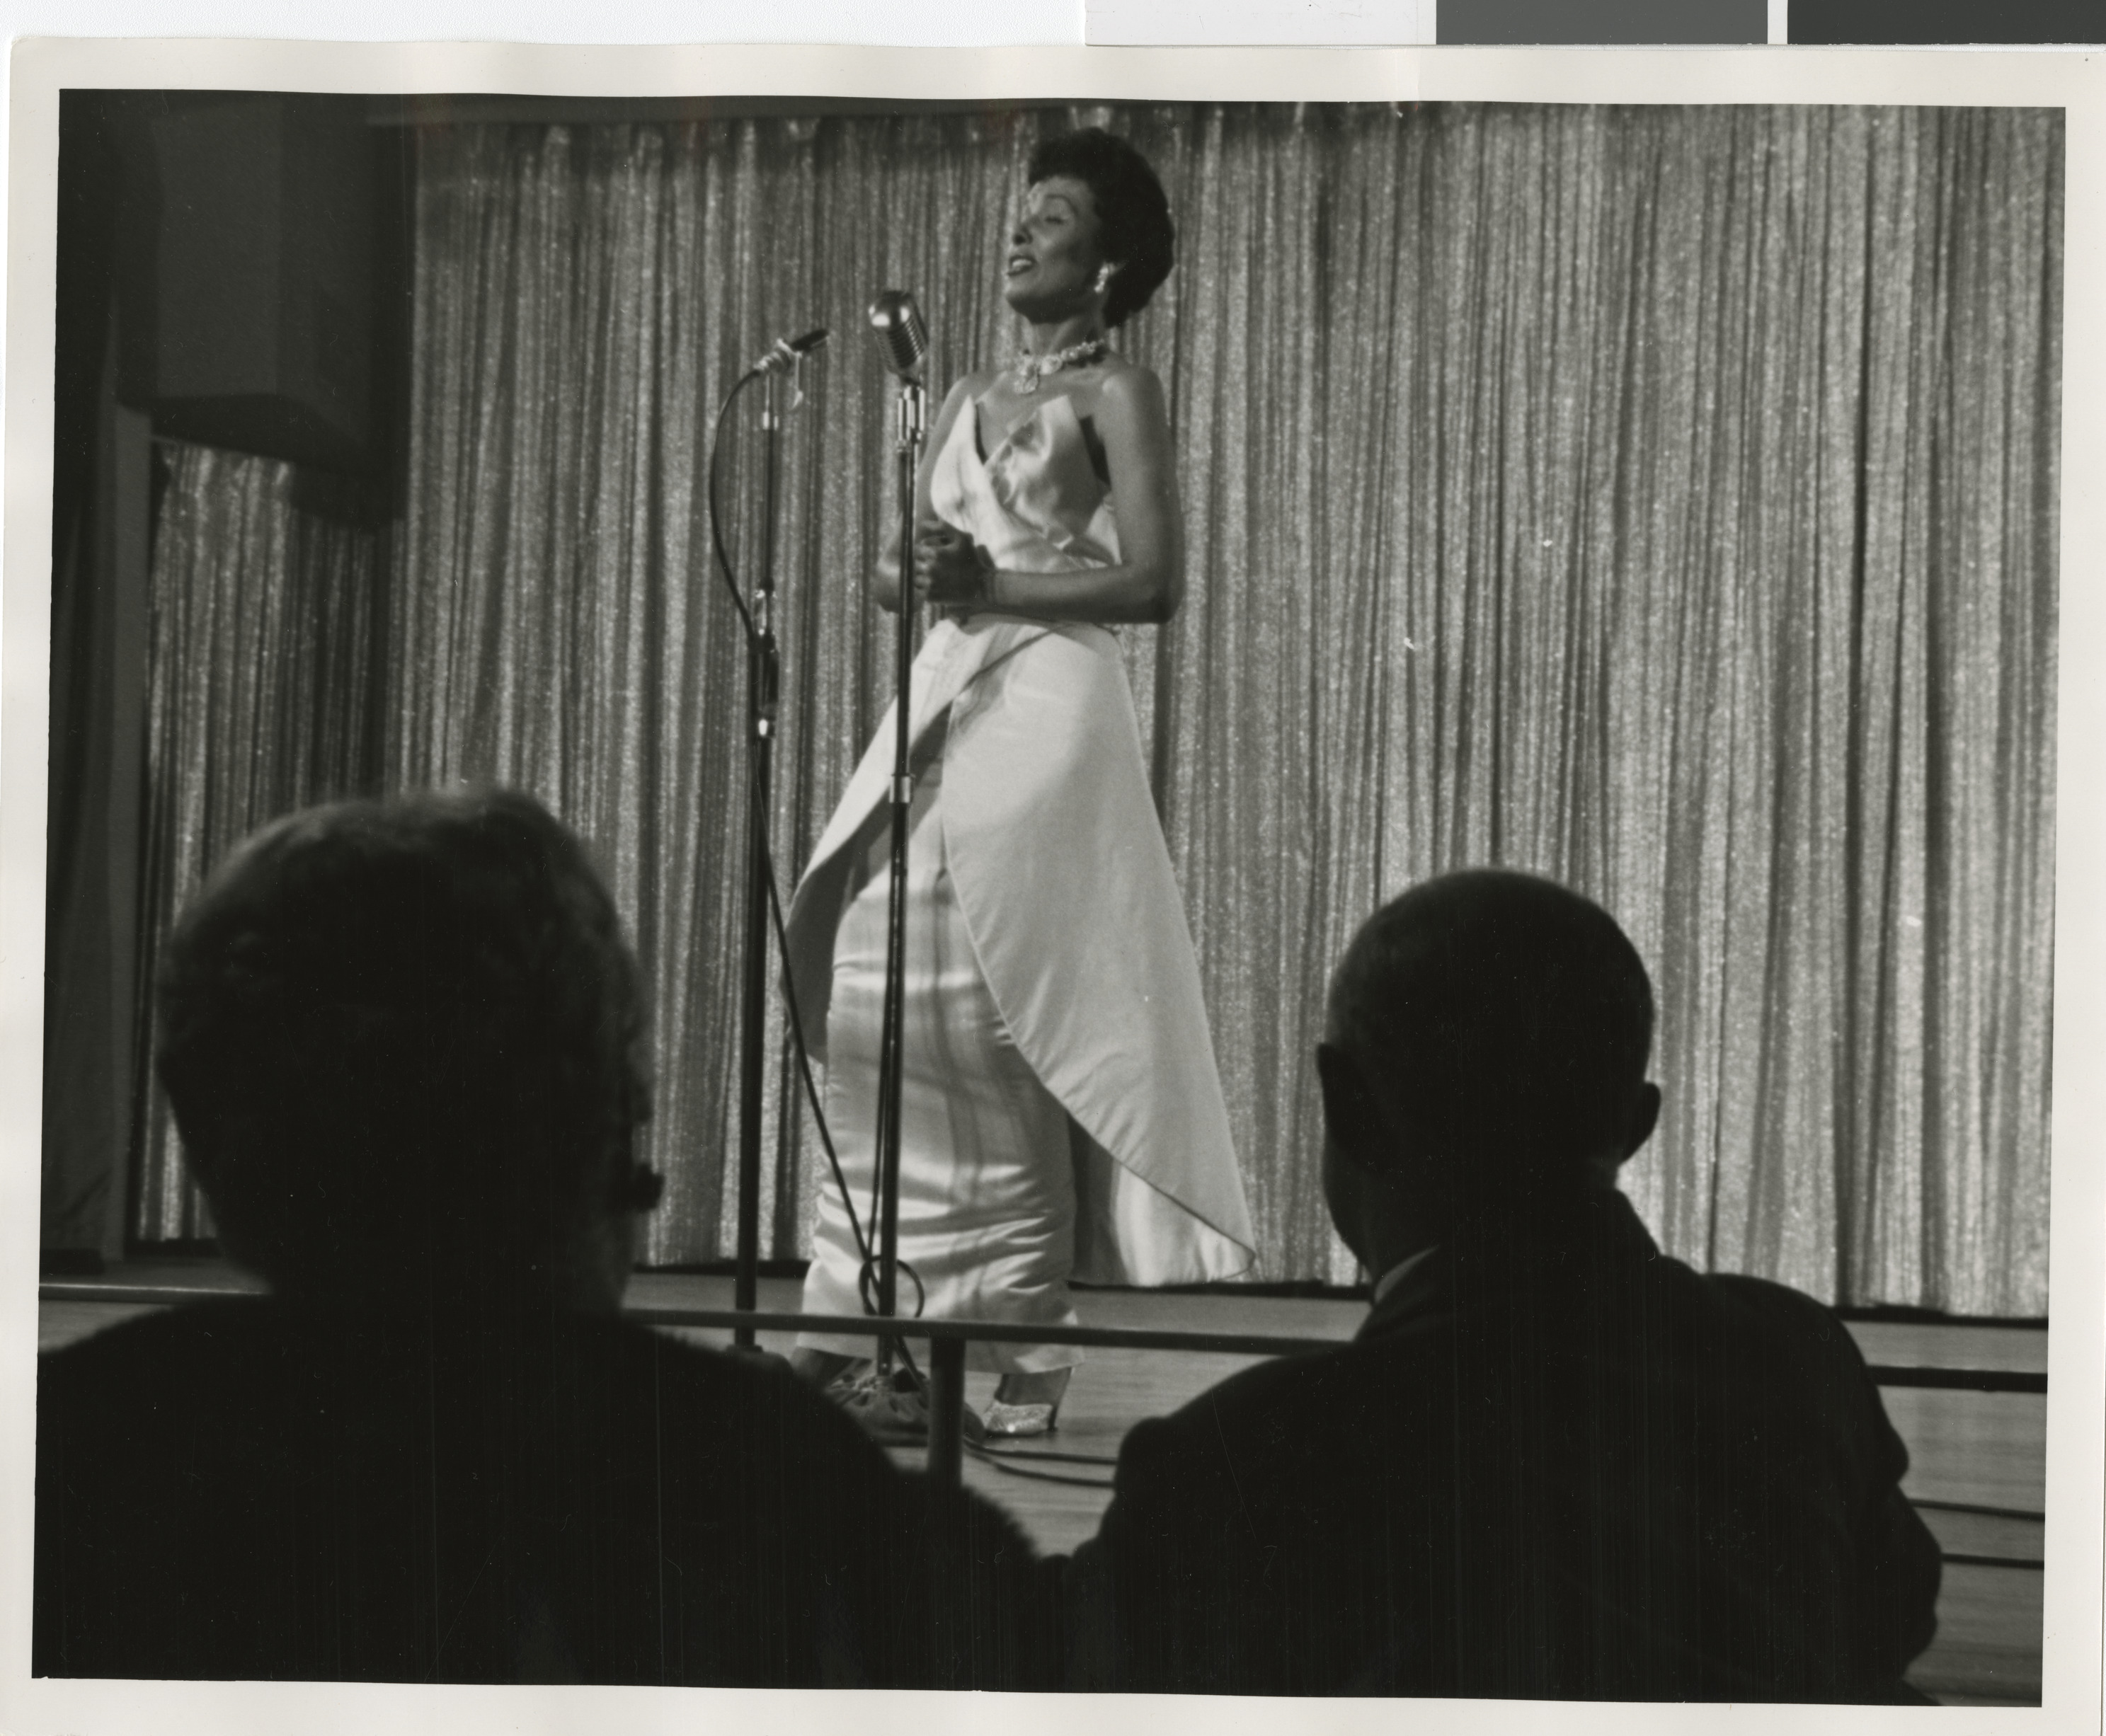 Horne performing, Image 48